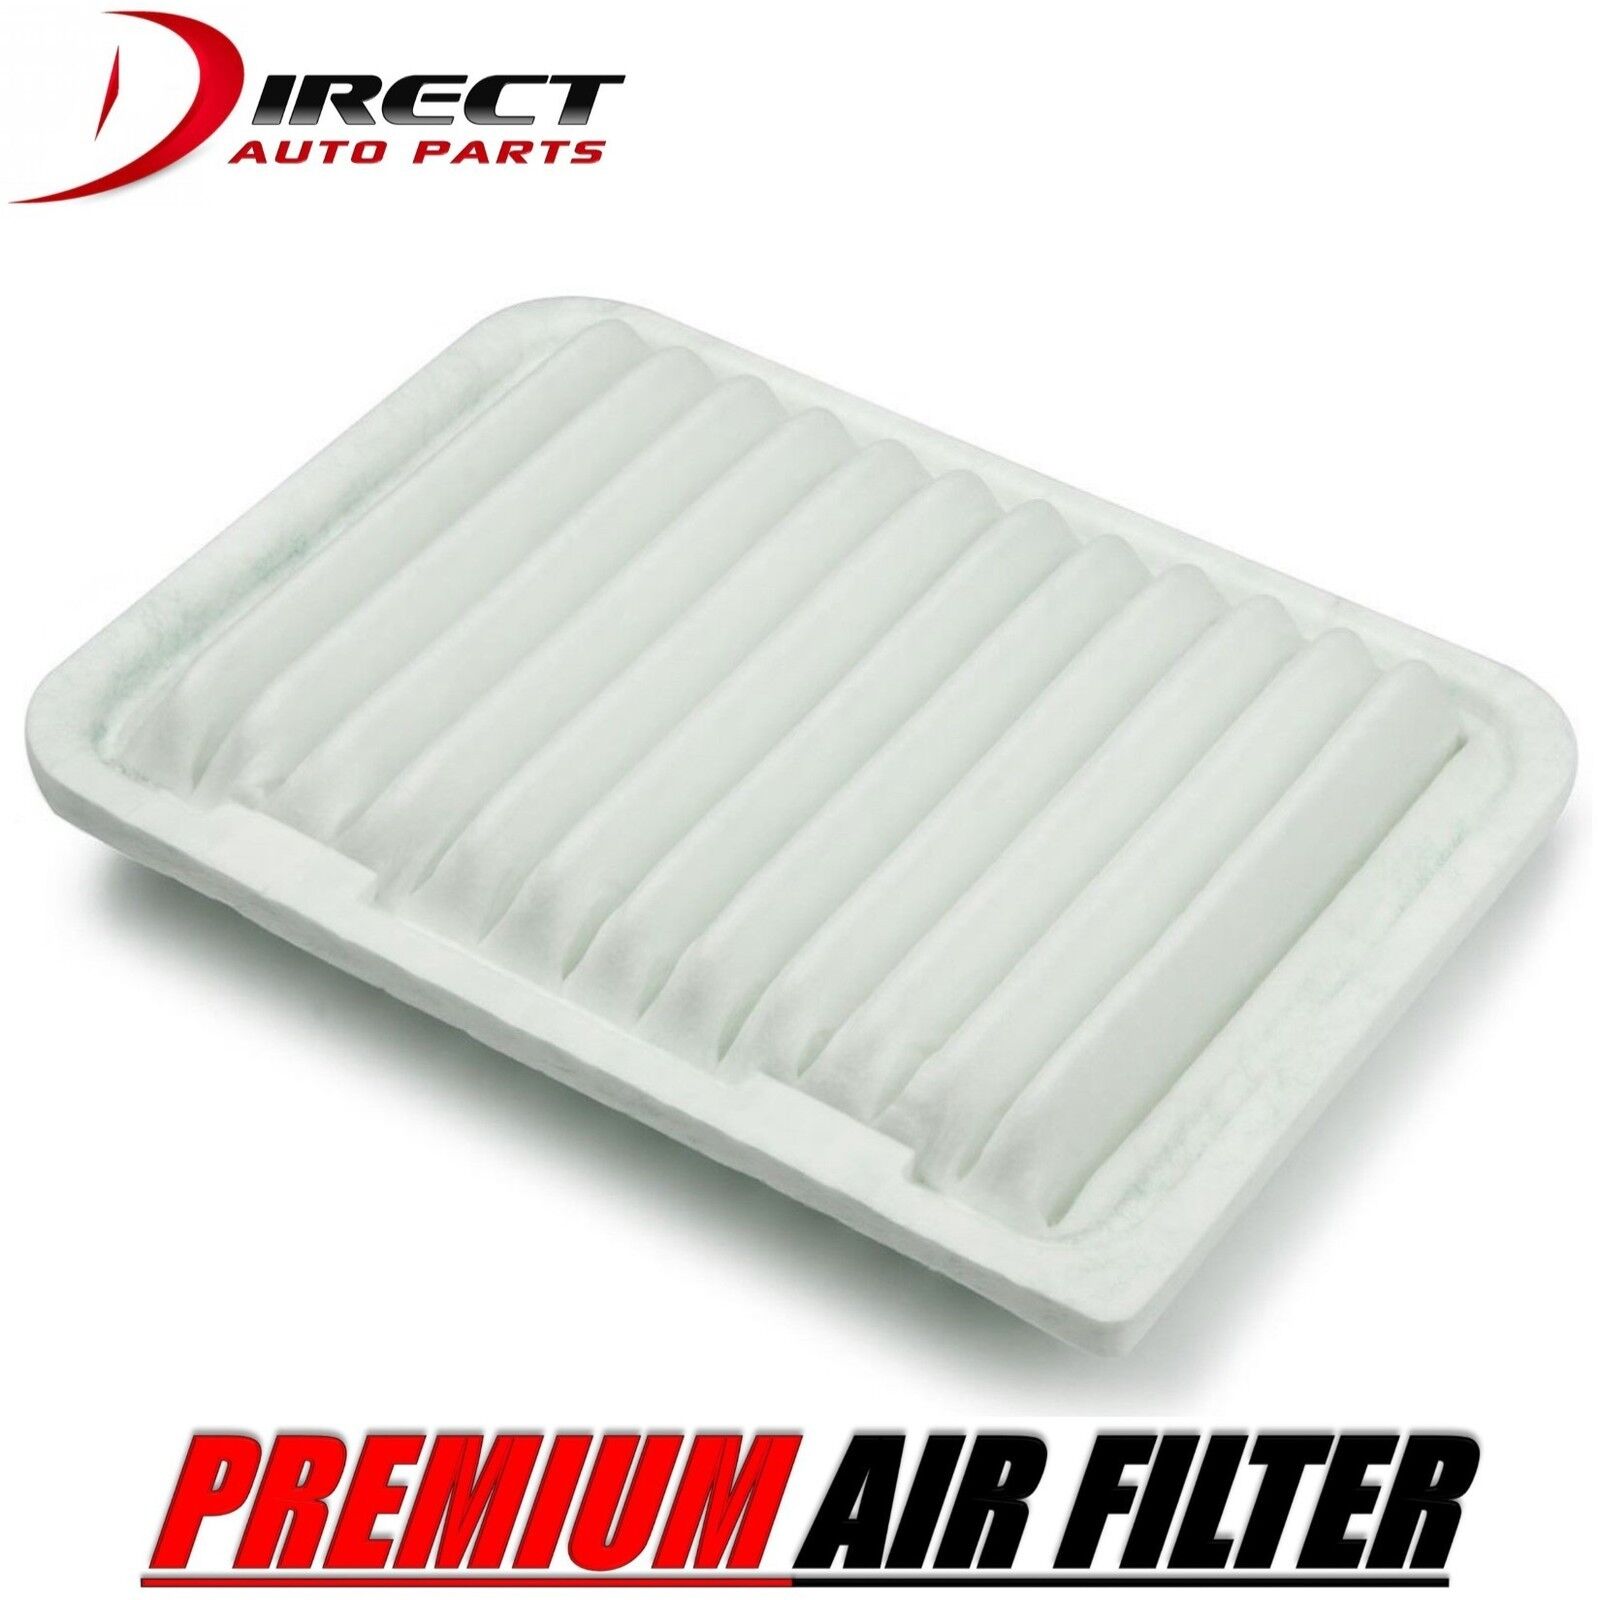 AIR FILTER FOR TOYOTA SOLARA 2.4L ENGINE 2004 - 2008